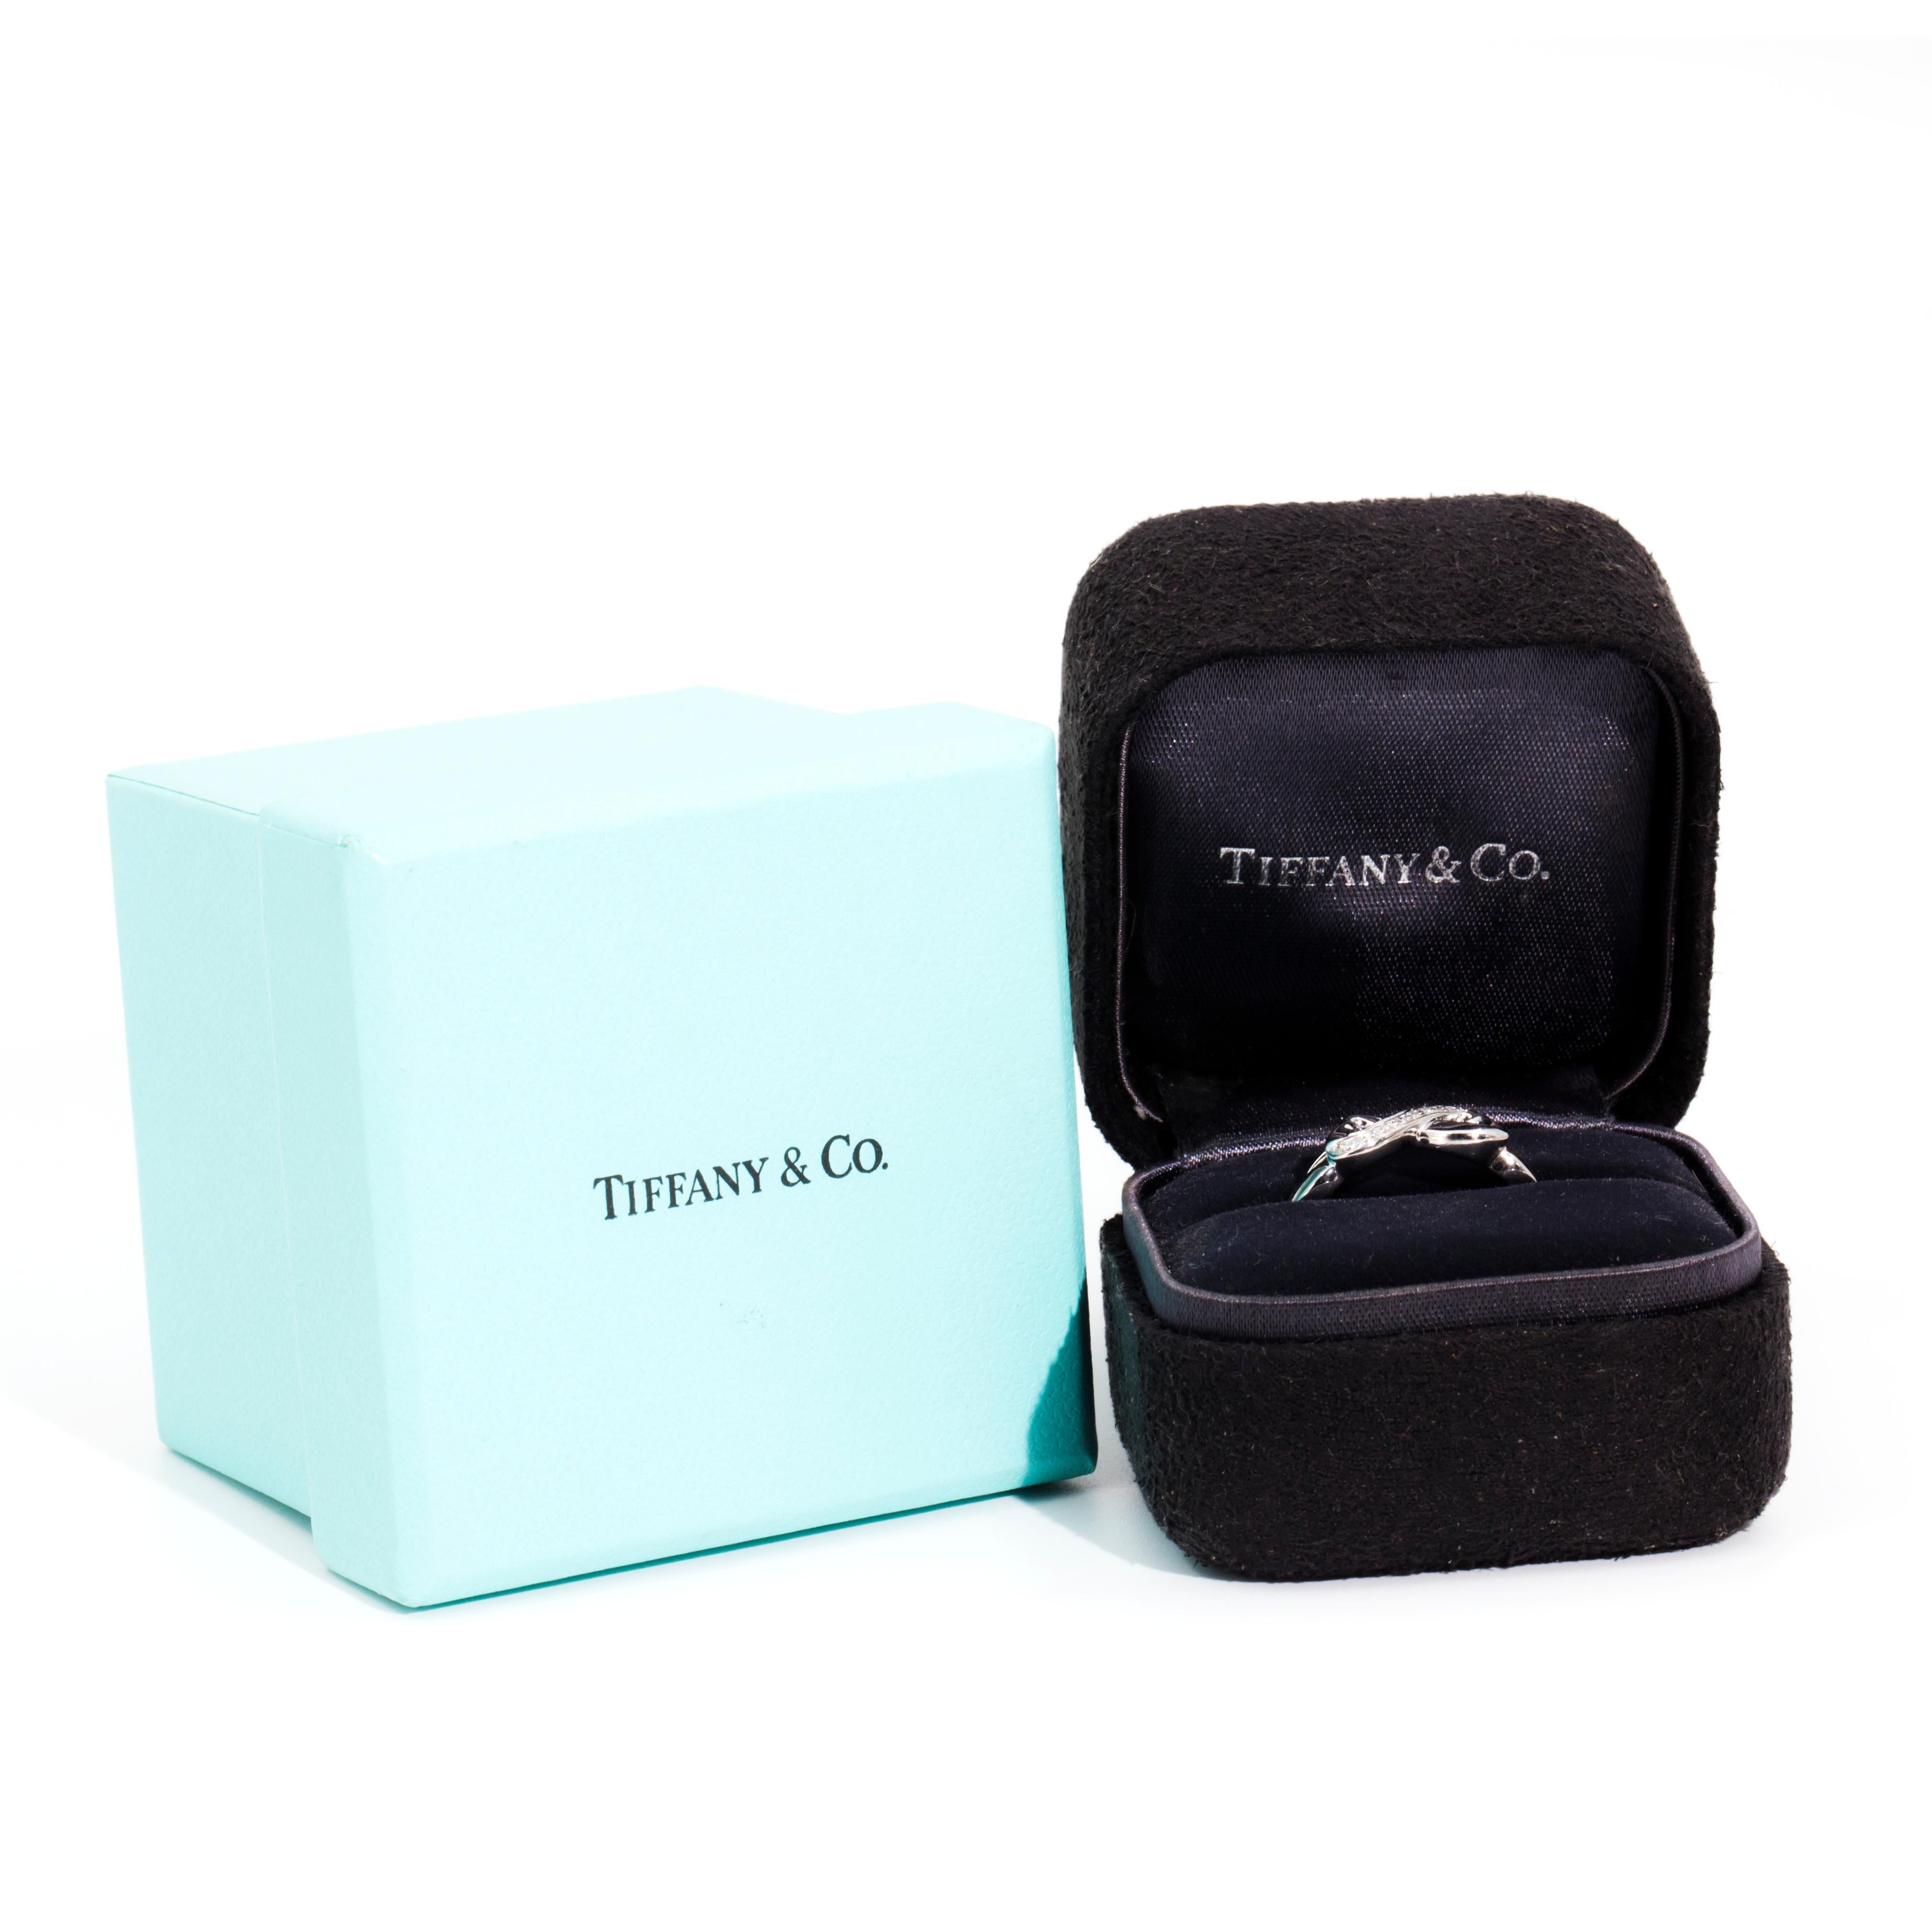 Tiffany & Co. Palomo Picasso Vintage Twisting Heart Ring in 18 Carat White Gold 6